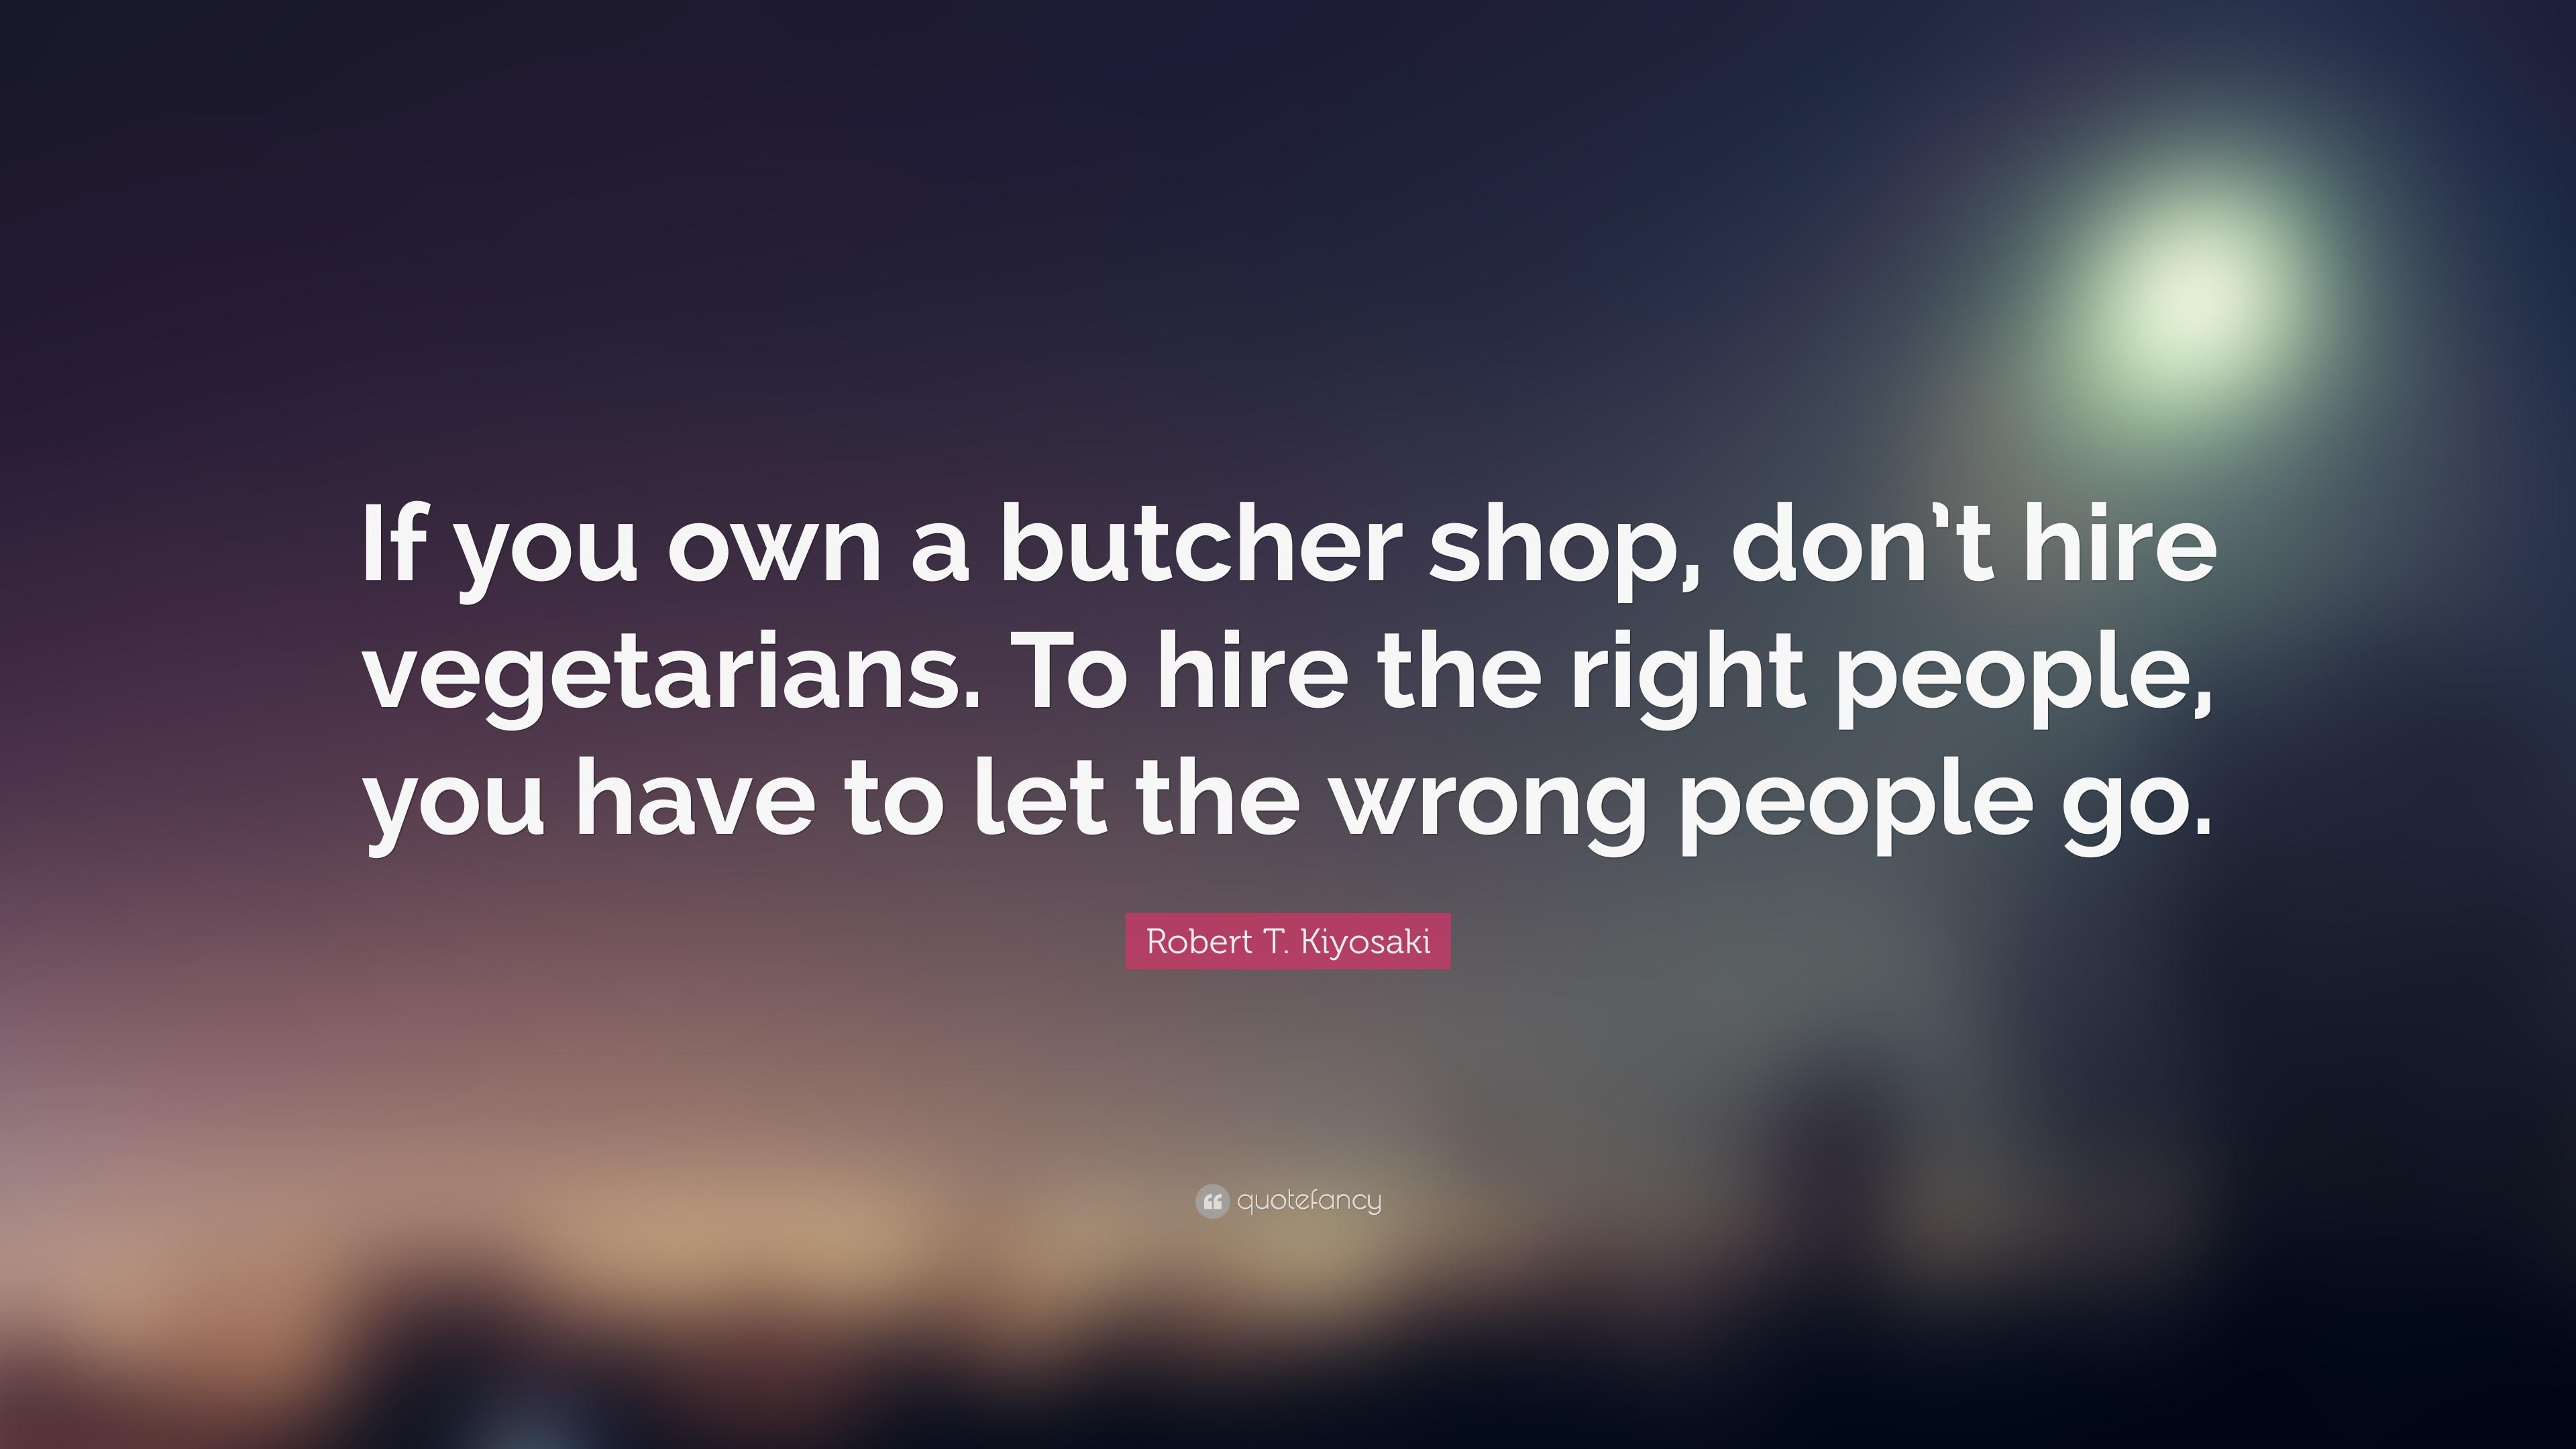 Robert T. Kiyosaki Quote: “If you own a butcher shop, don't hire